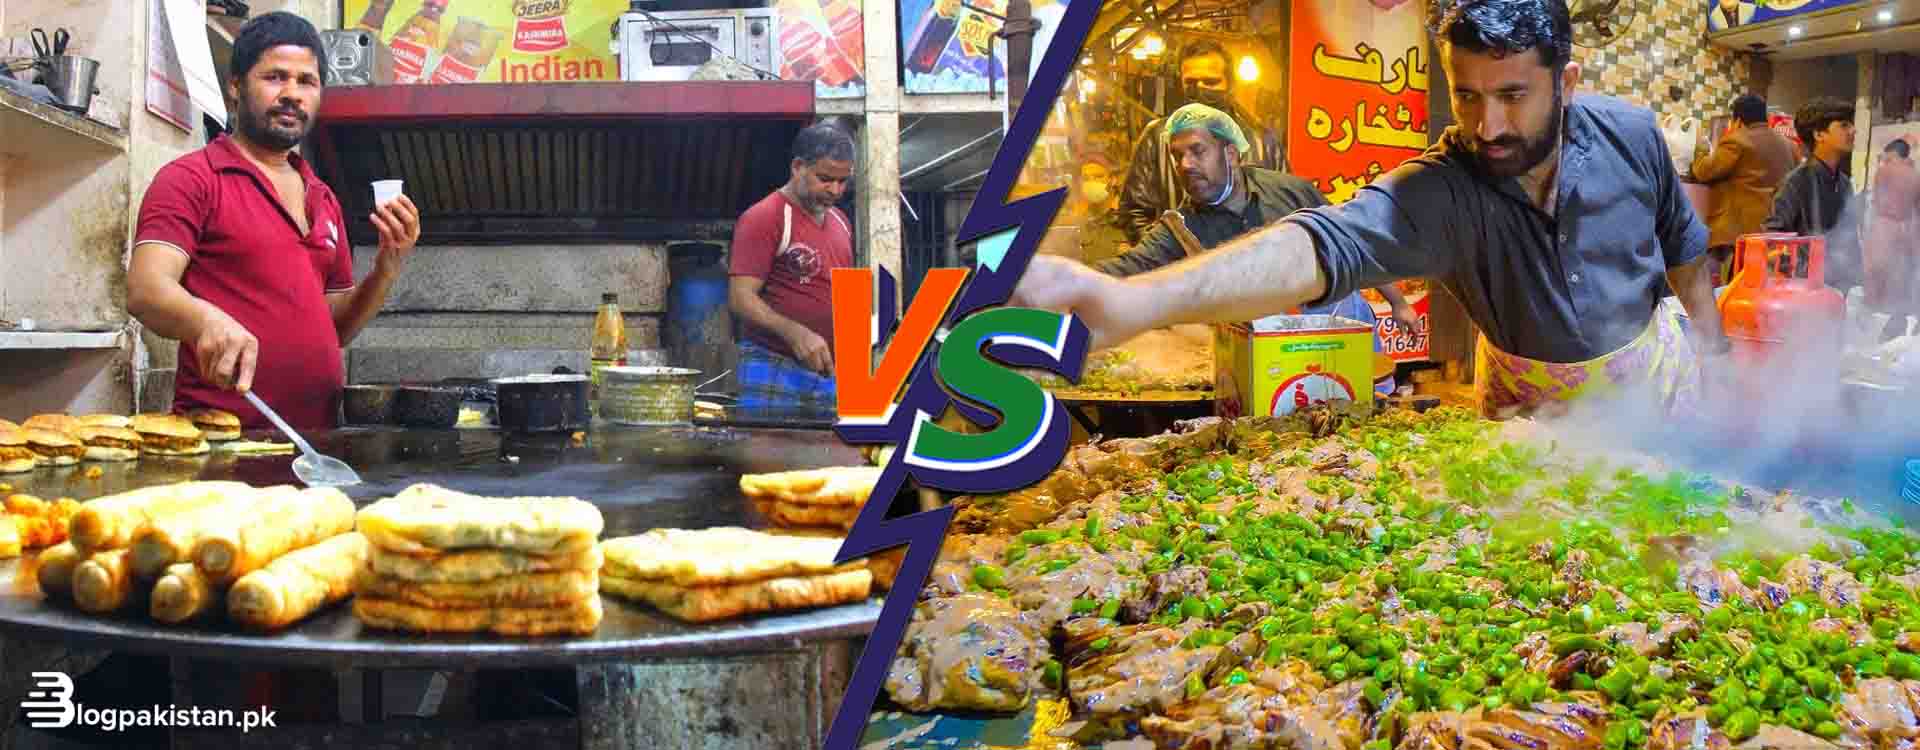 5-Reasons-Why-Indian-Street-Food-is-Better-Than-Pakistani-Street-Food